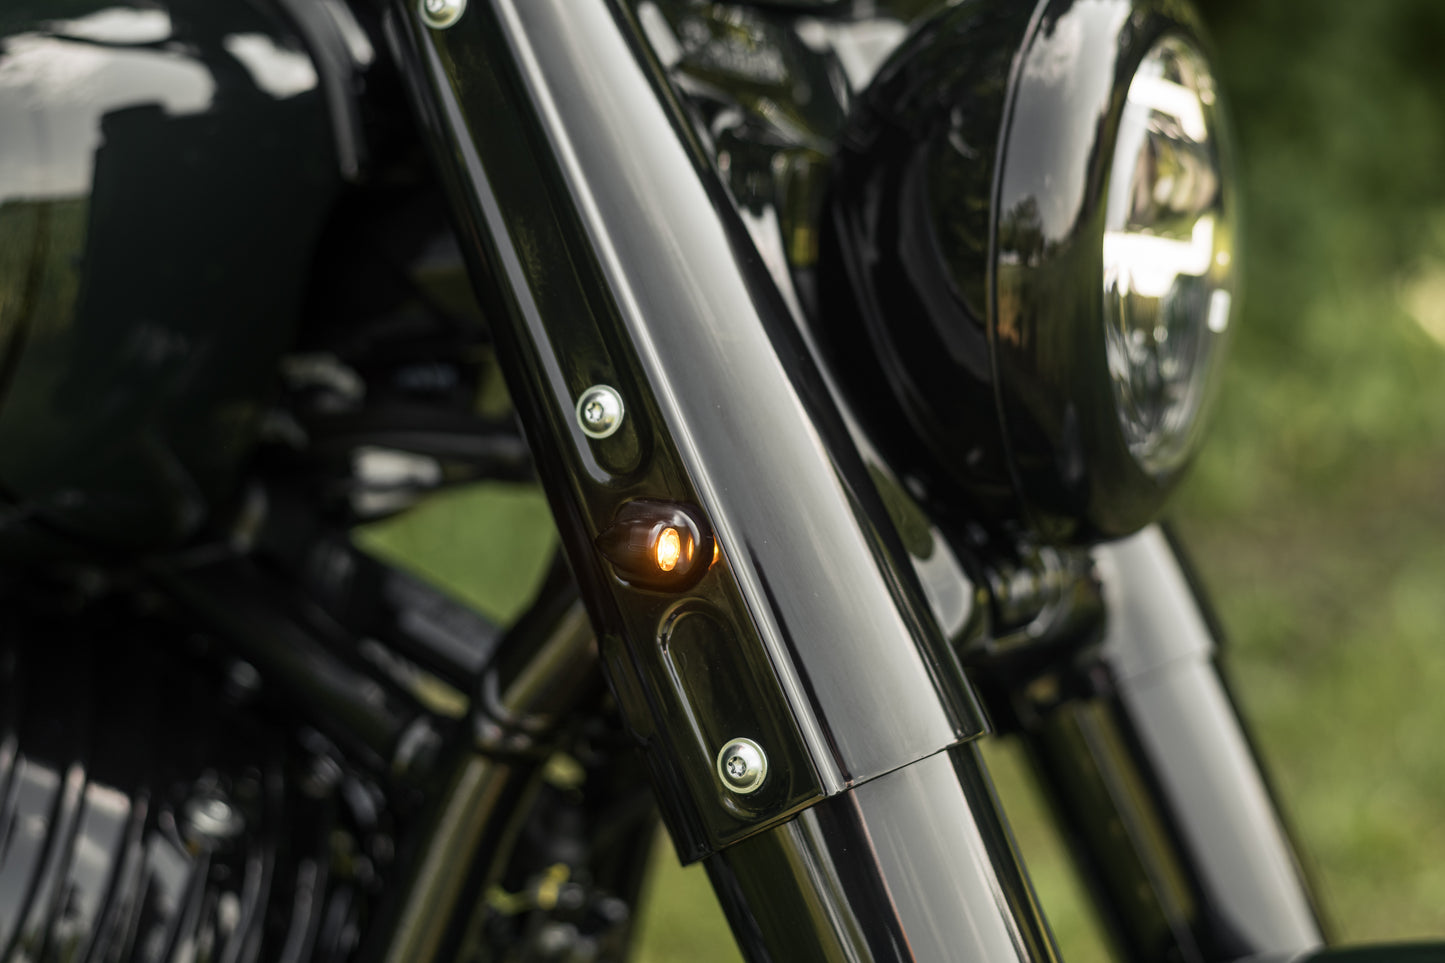 Zoomed Harley Davidson motorcycle with Killer Custom "Mohawk" front led turn signals green blurry background